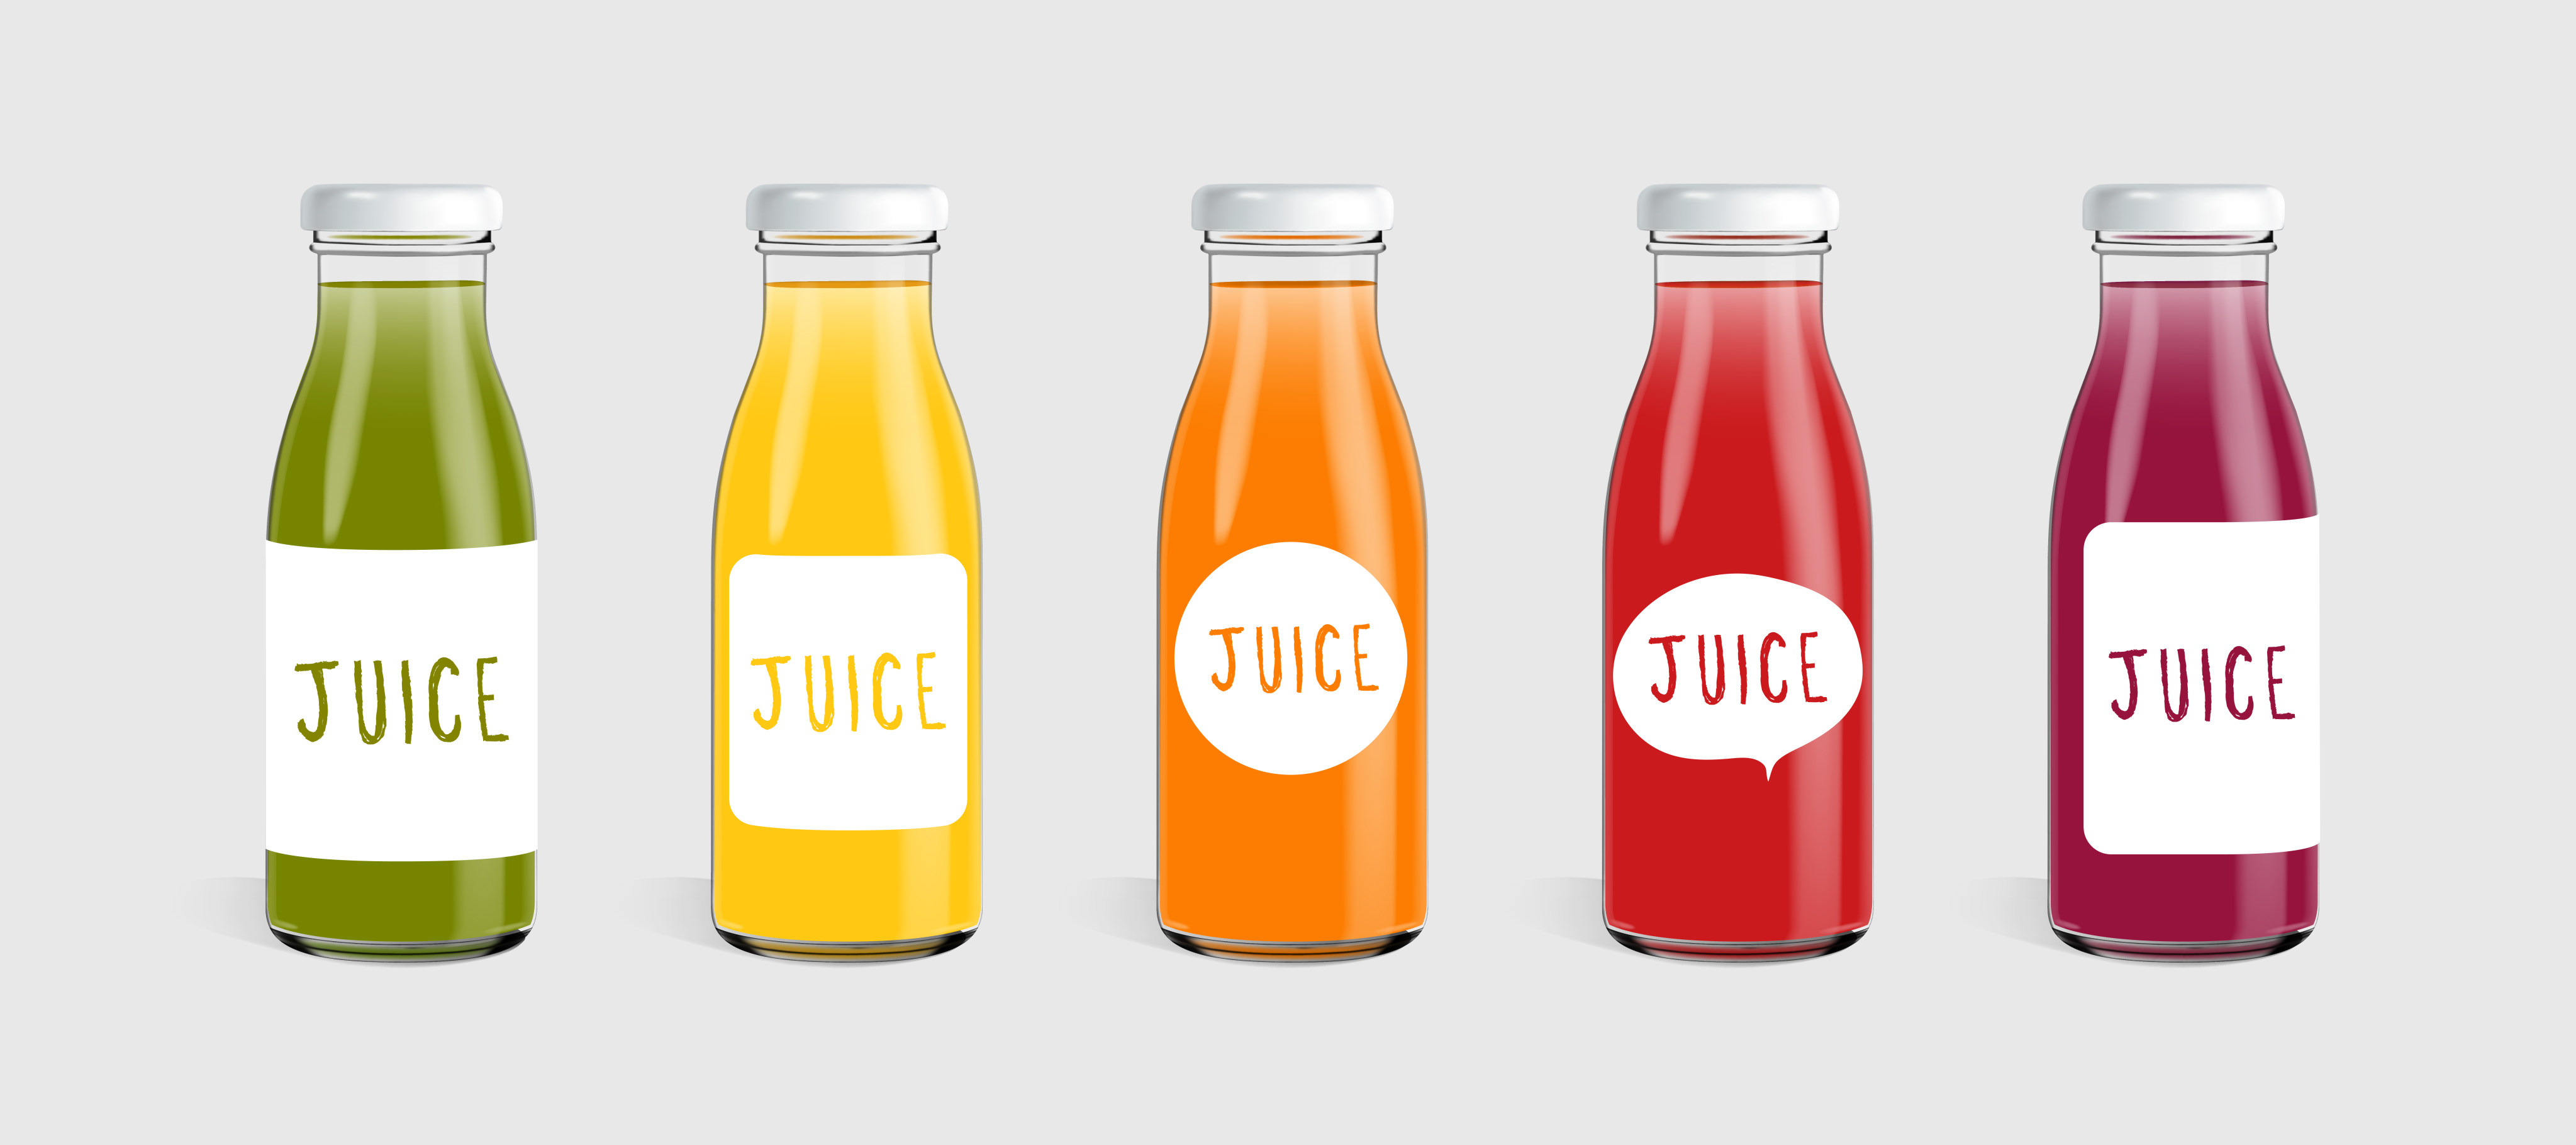 You should read labels carefully to figure out what is really in your drink. Photo: Shutterstock